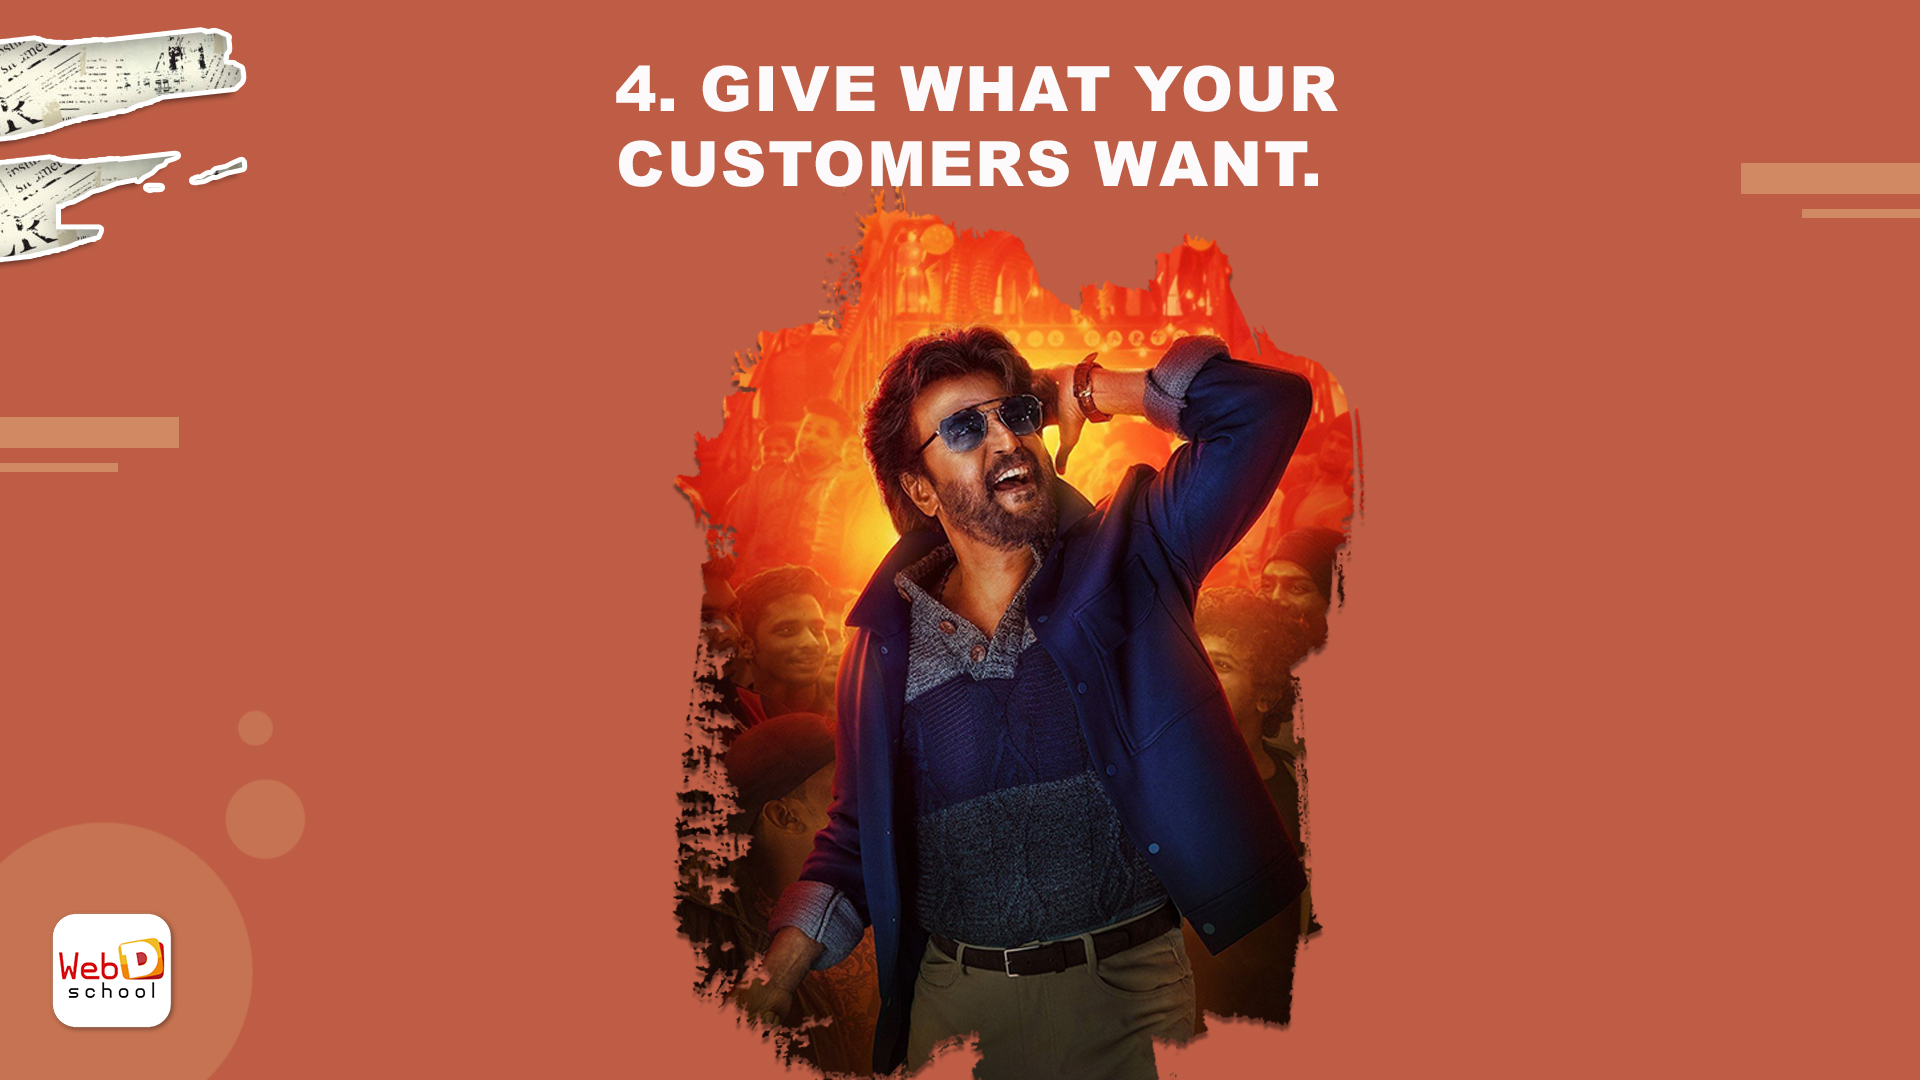 Give what your customers want.